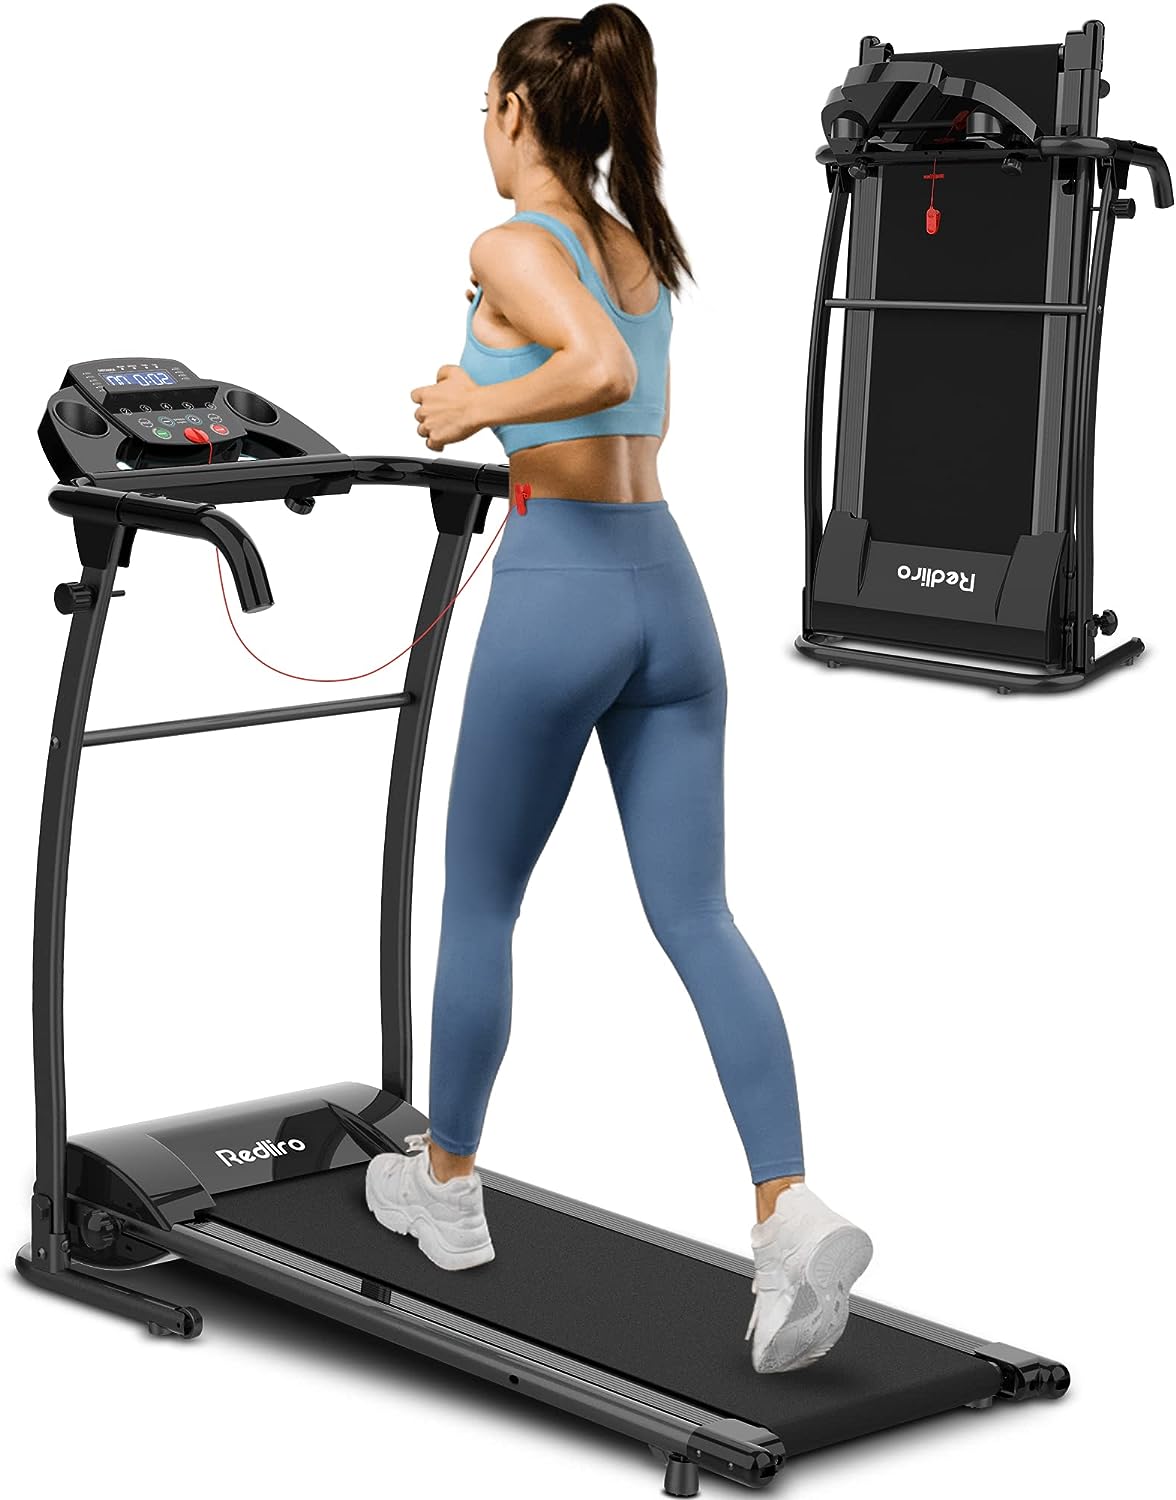 REDLIRO Electric Treadmill Foldable Exercise Walking Machince for Apartment Home/Office Jogging Compact Folding Easy Assembly 12 Preset Program 2 Wheels LCD Display